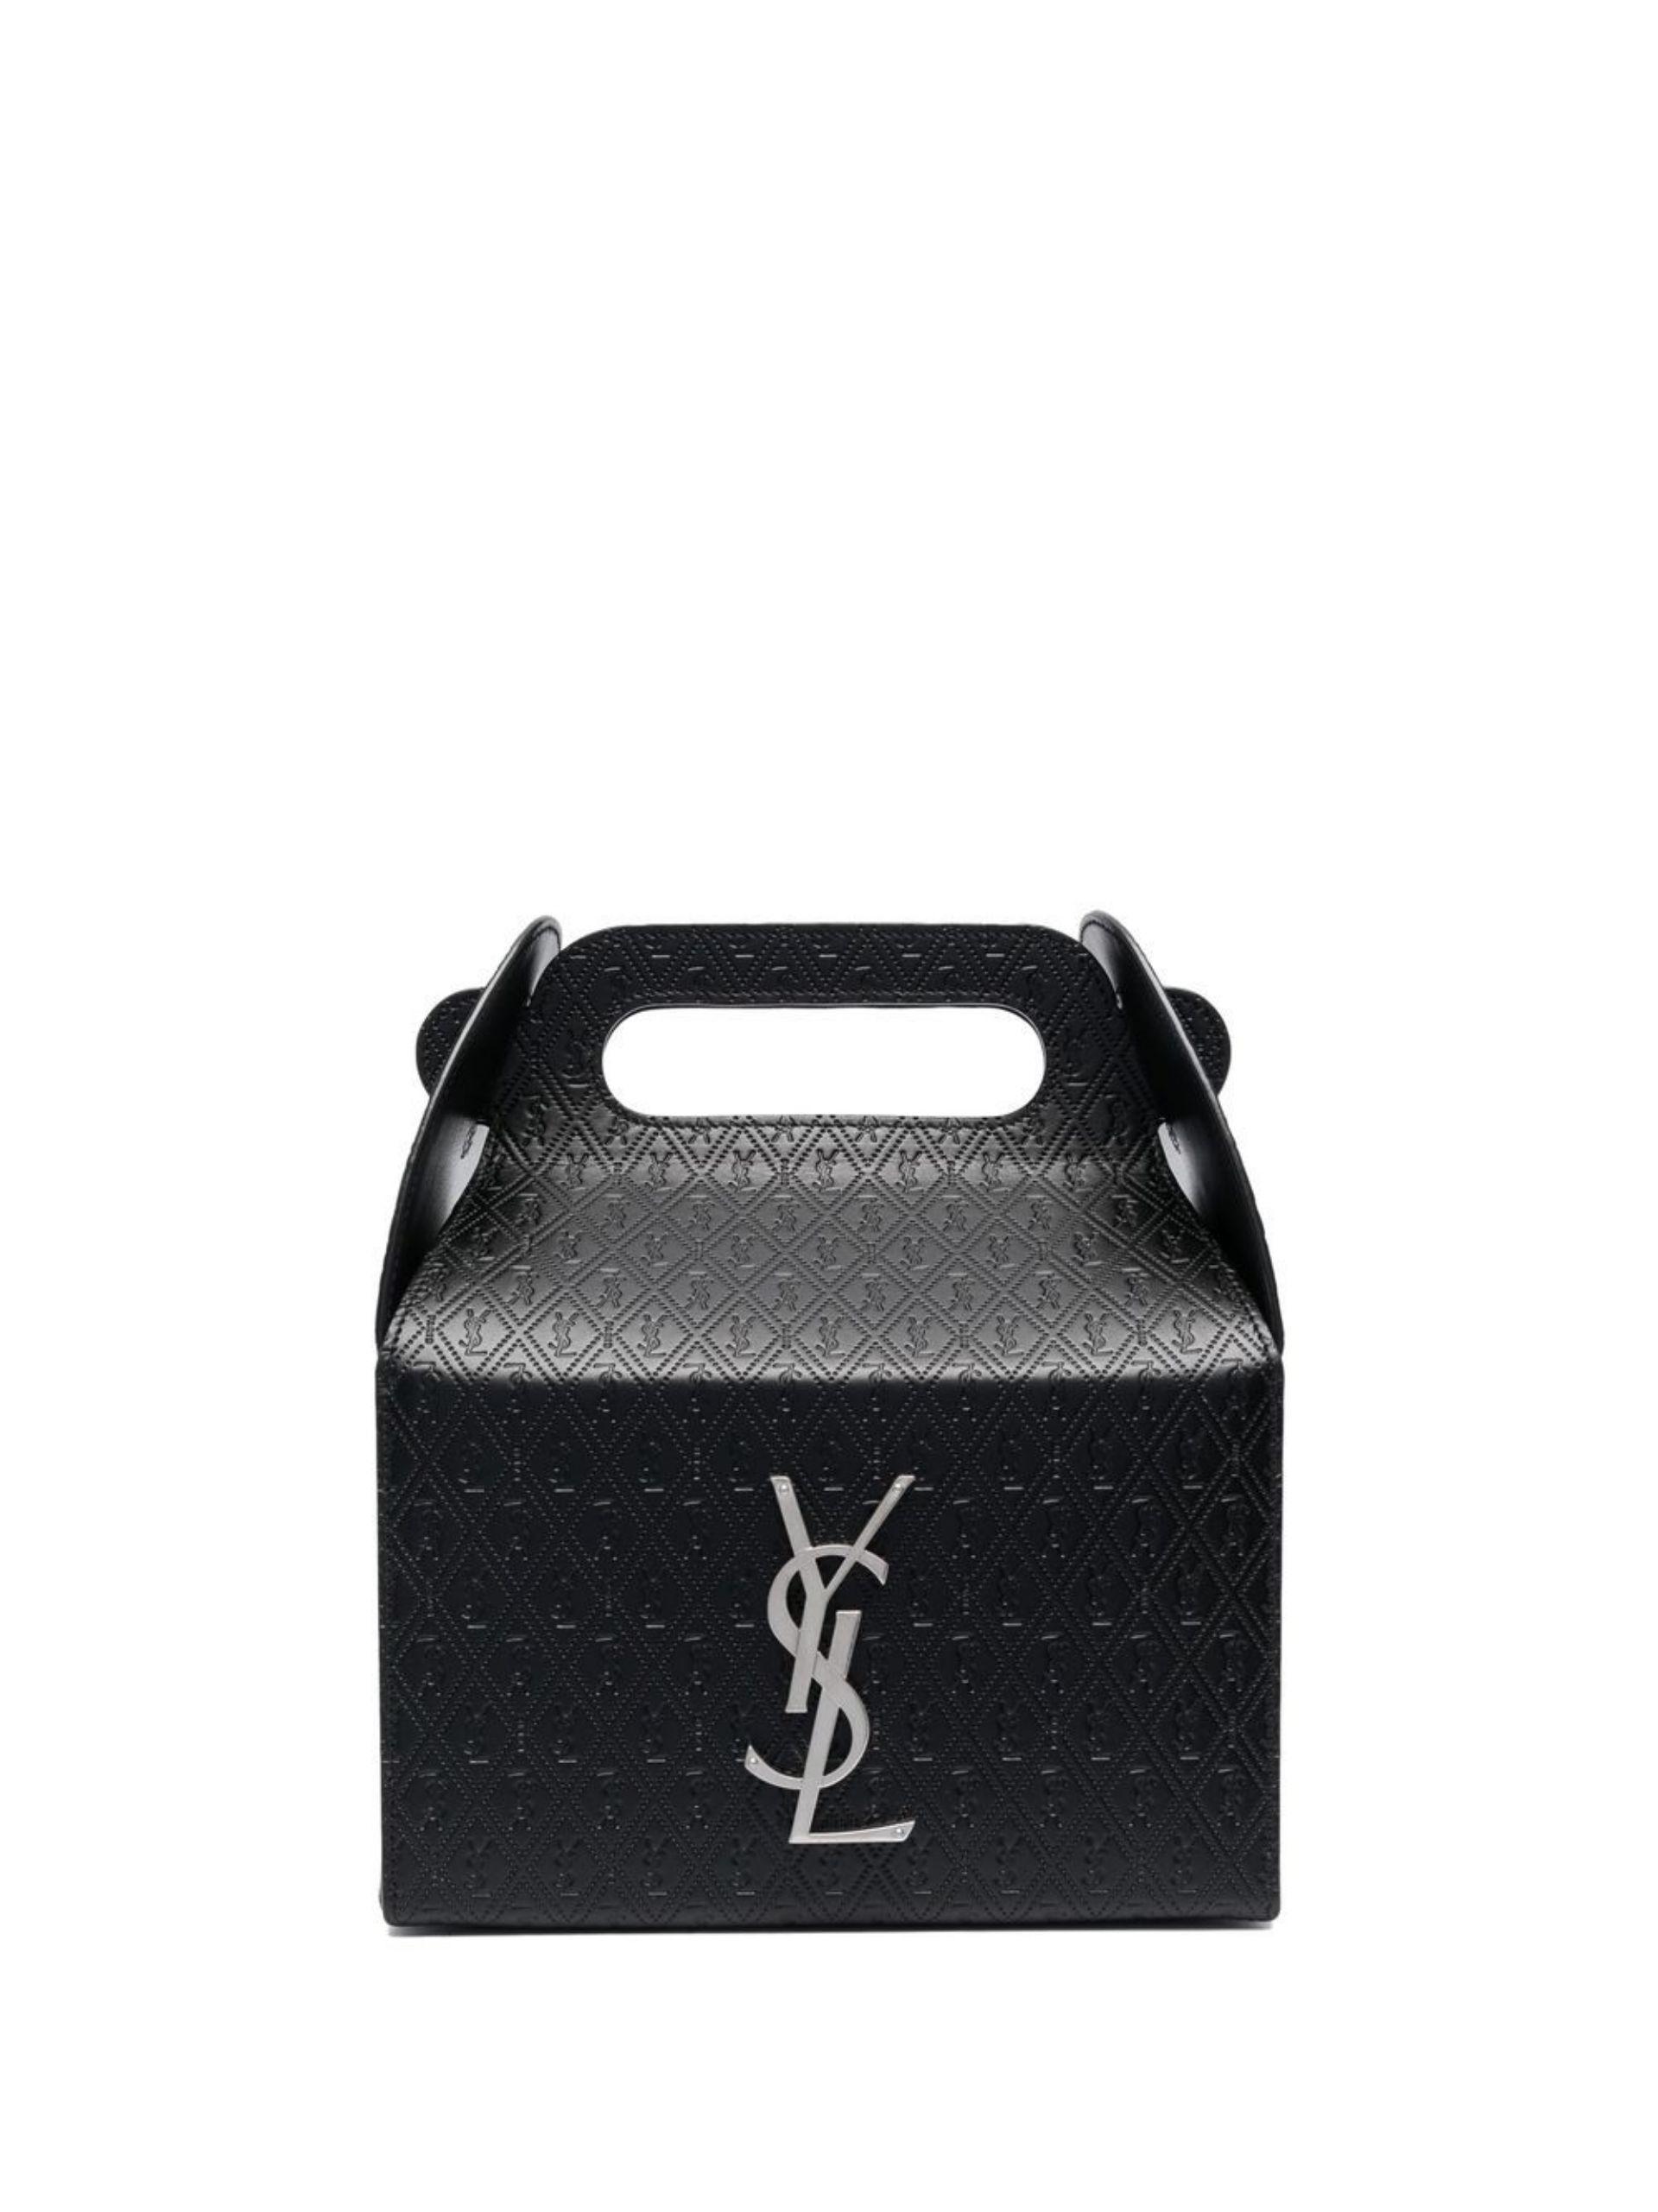 TAKE-AWAY BOX IN LEATHER, Saint Laurent